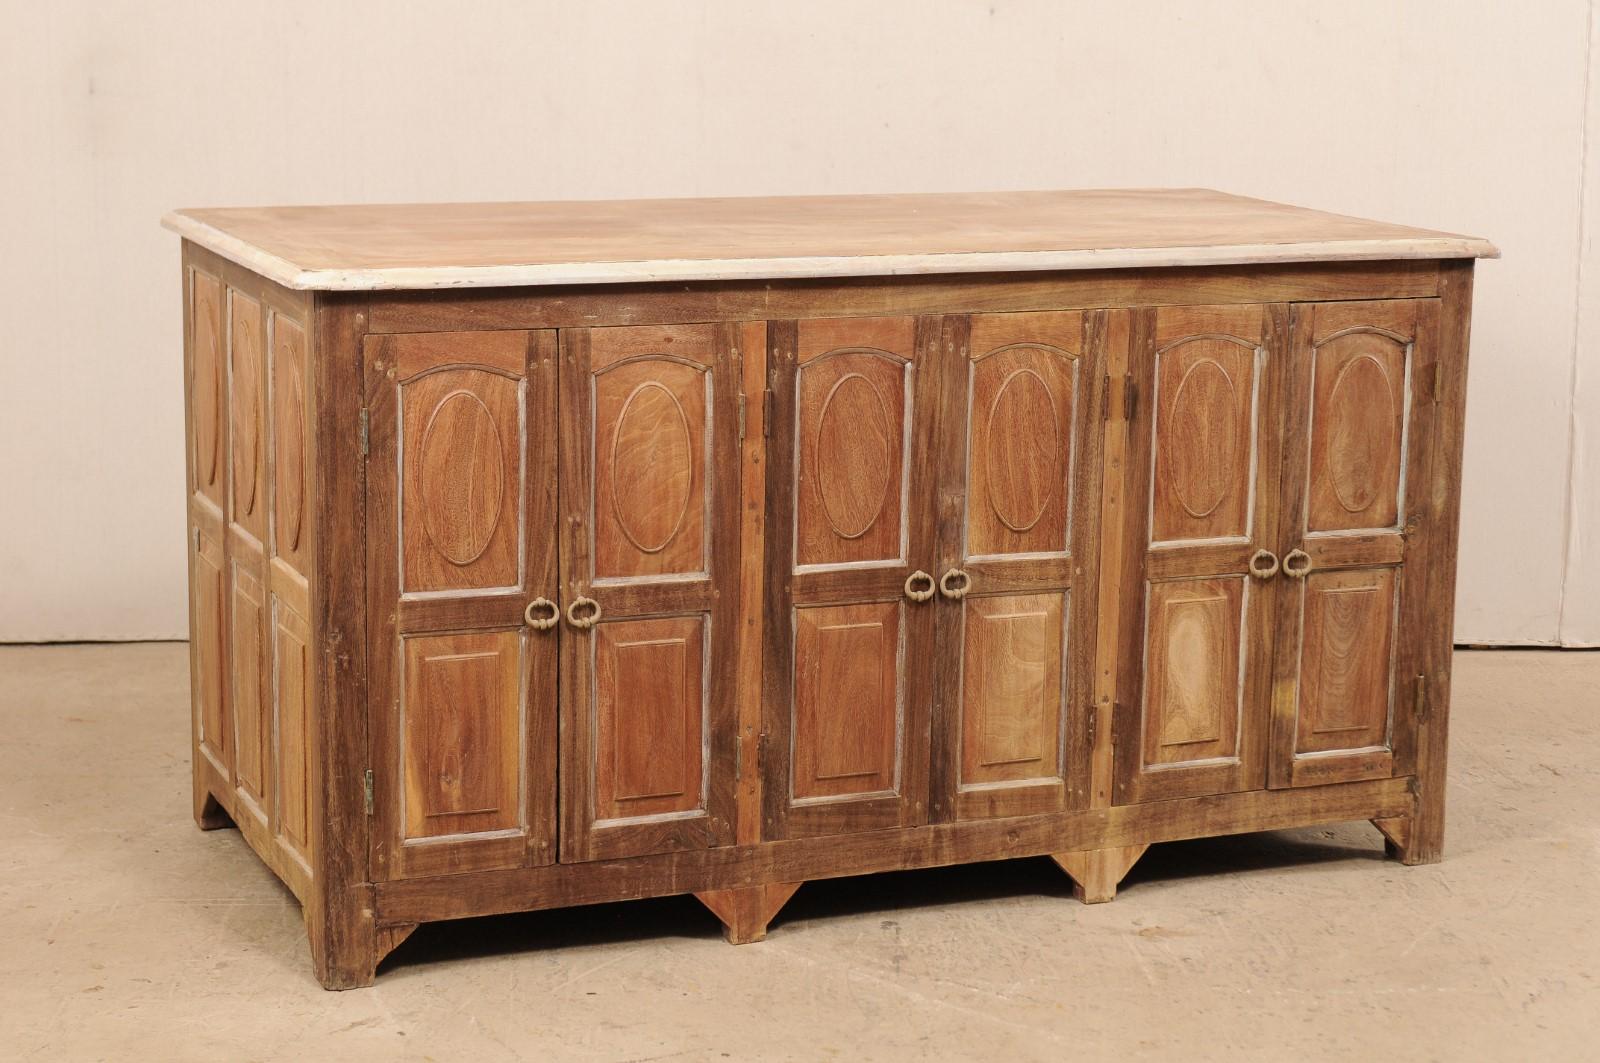 A wonderful British Colonial decoratively paneled work island with abundant storage from the early 20th century. This antique wooden cabinet features a rectangular-shaped top with rounded corners, above a case which is decorated on all sides with